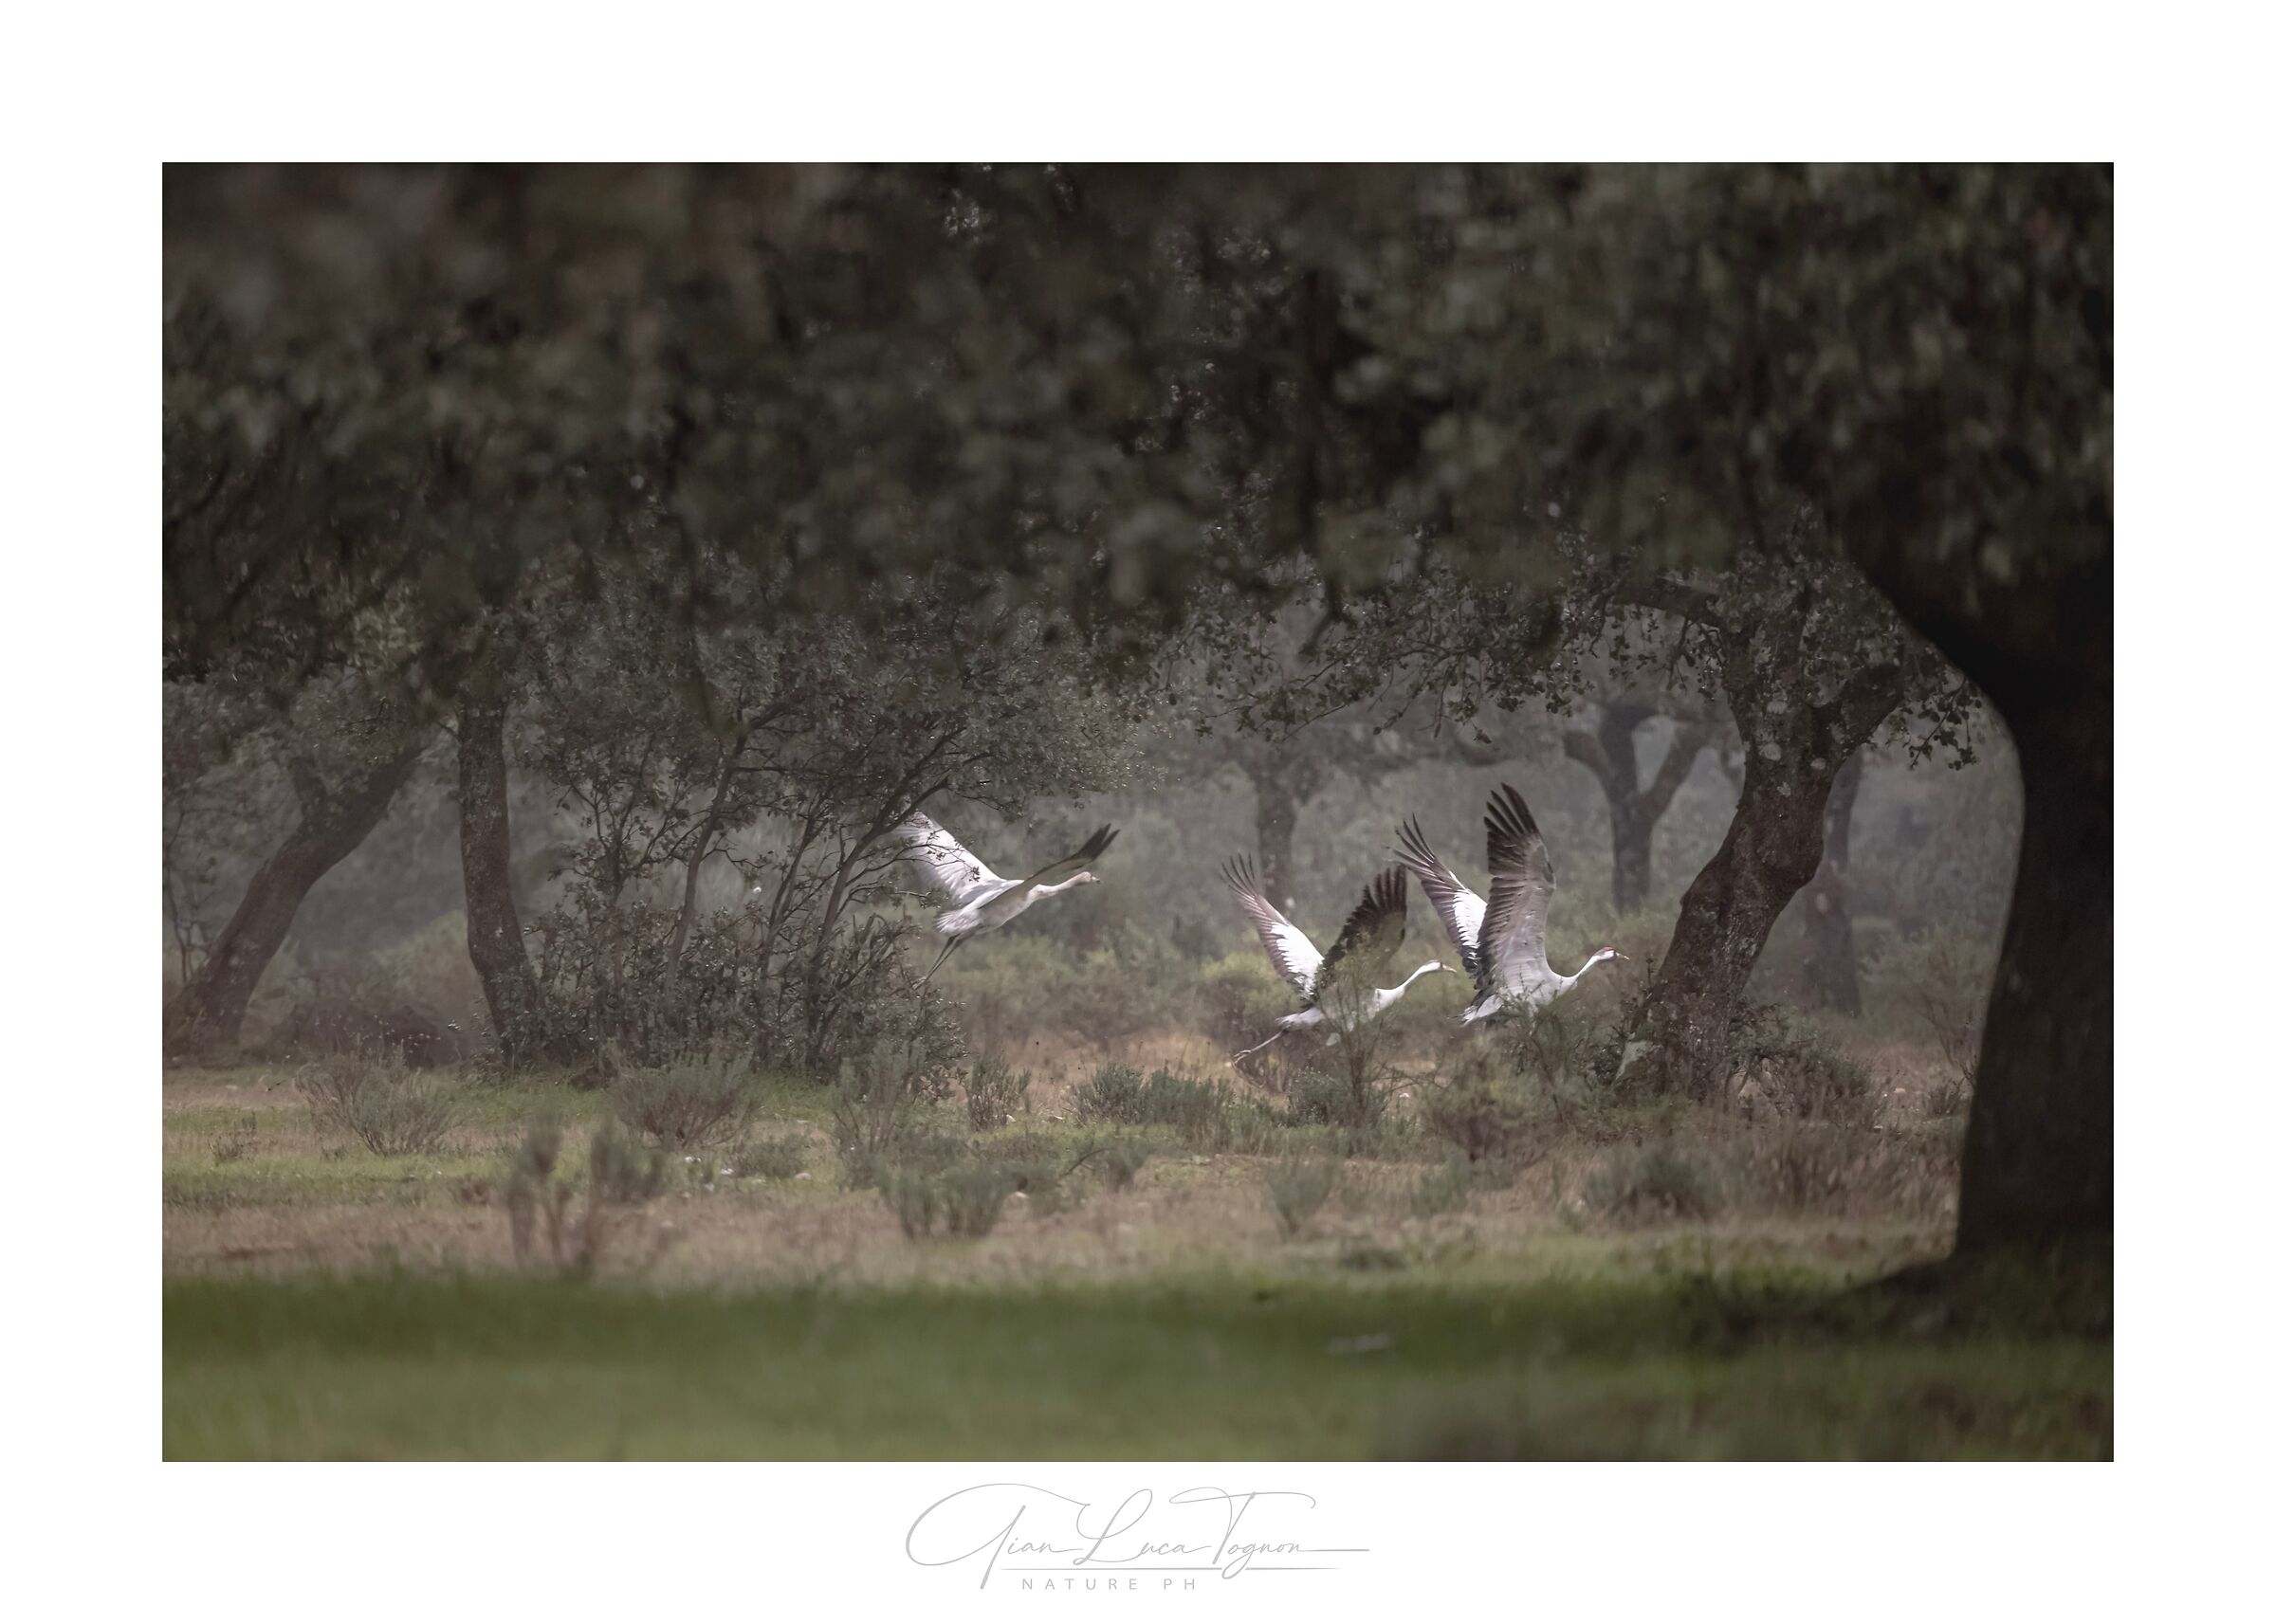 Cranes fly among the olive trees...